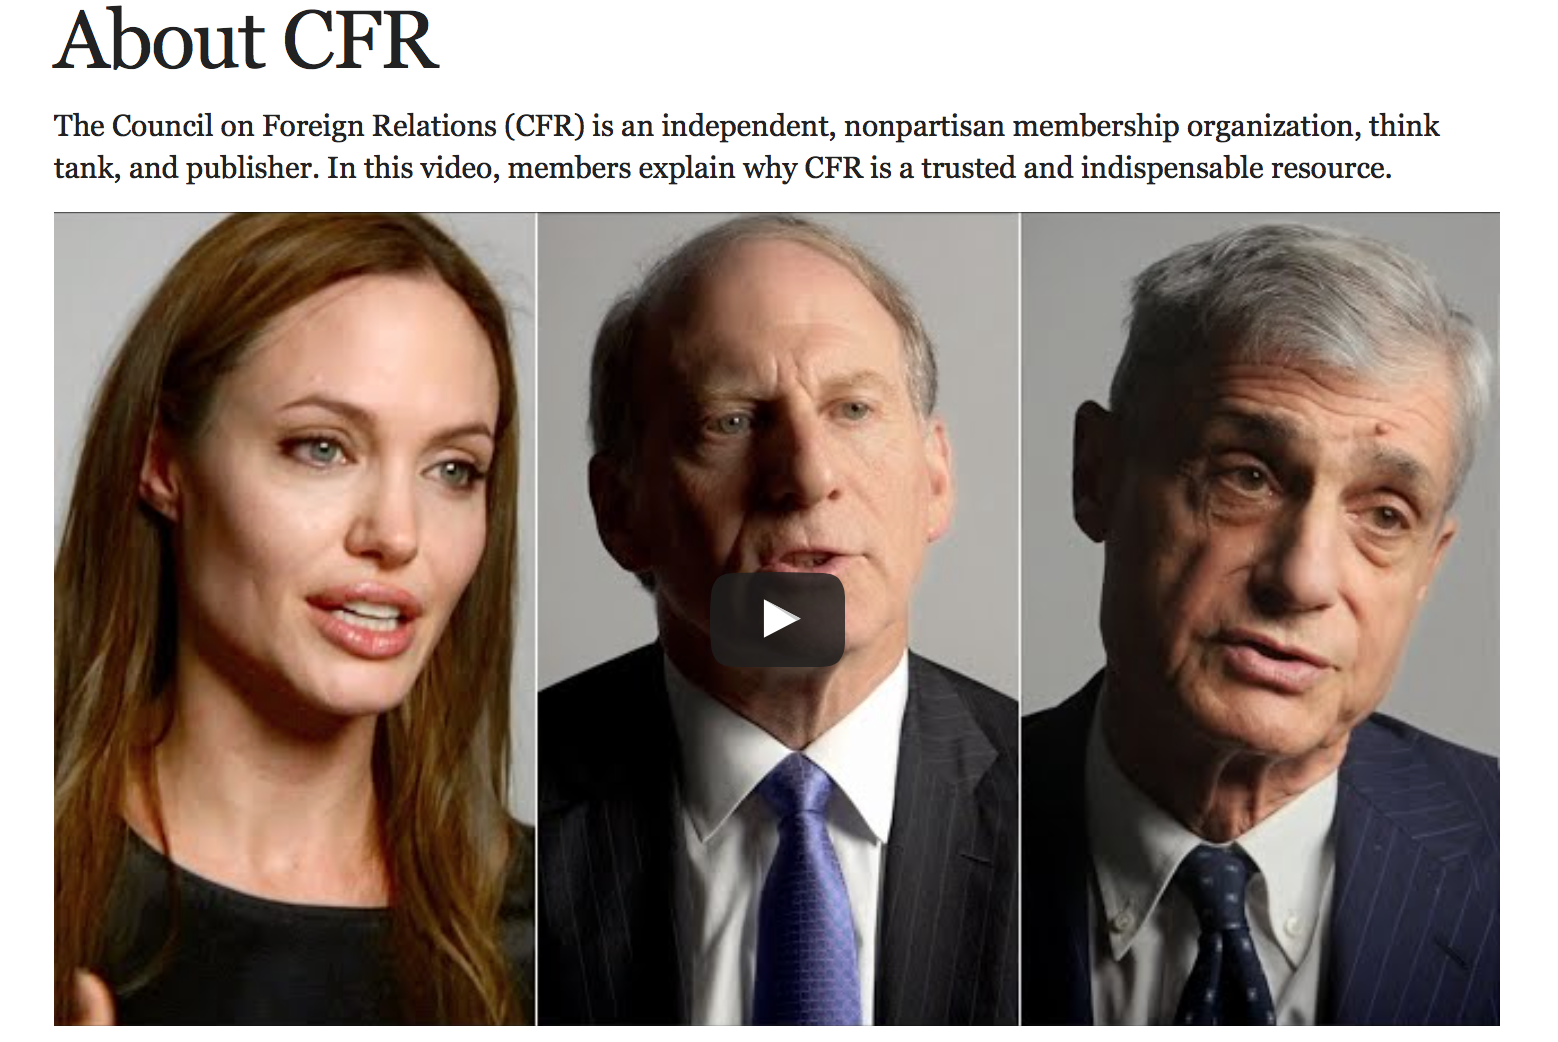 Council on Foreign Relations CFR - We Shall Have One World Government by Conquest or Consent - Video